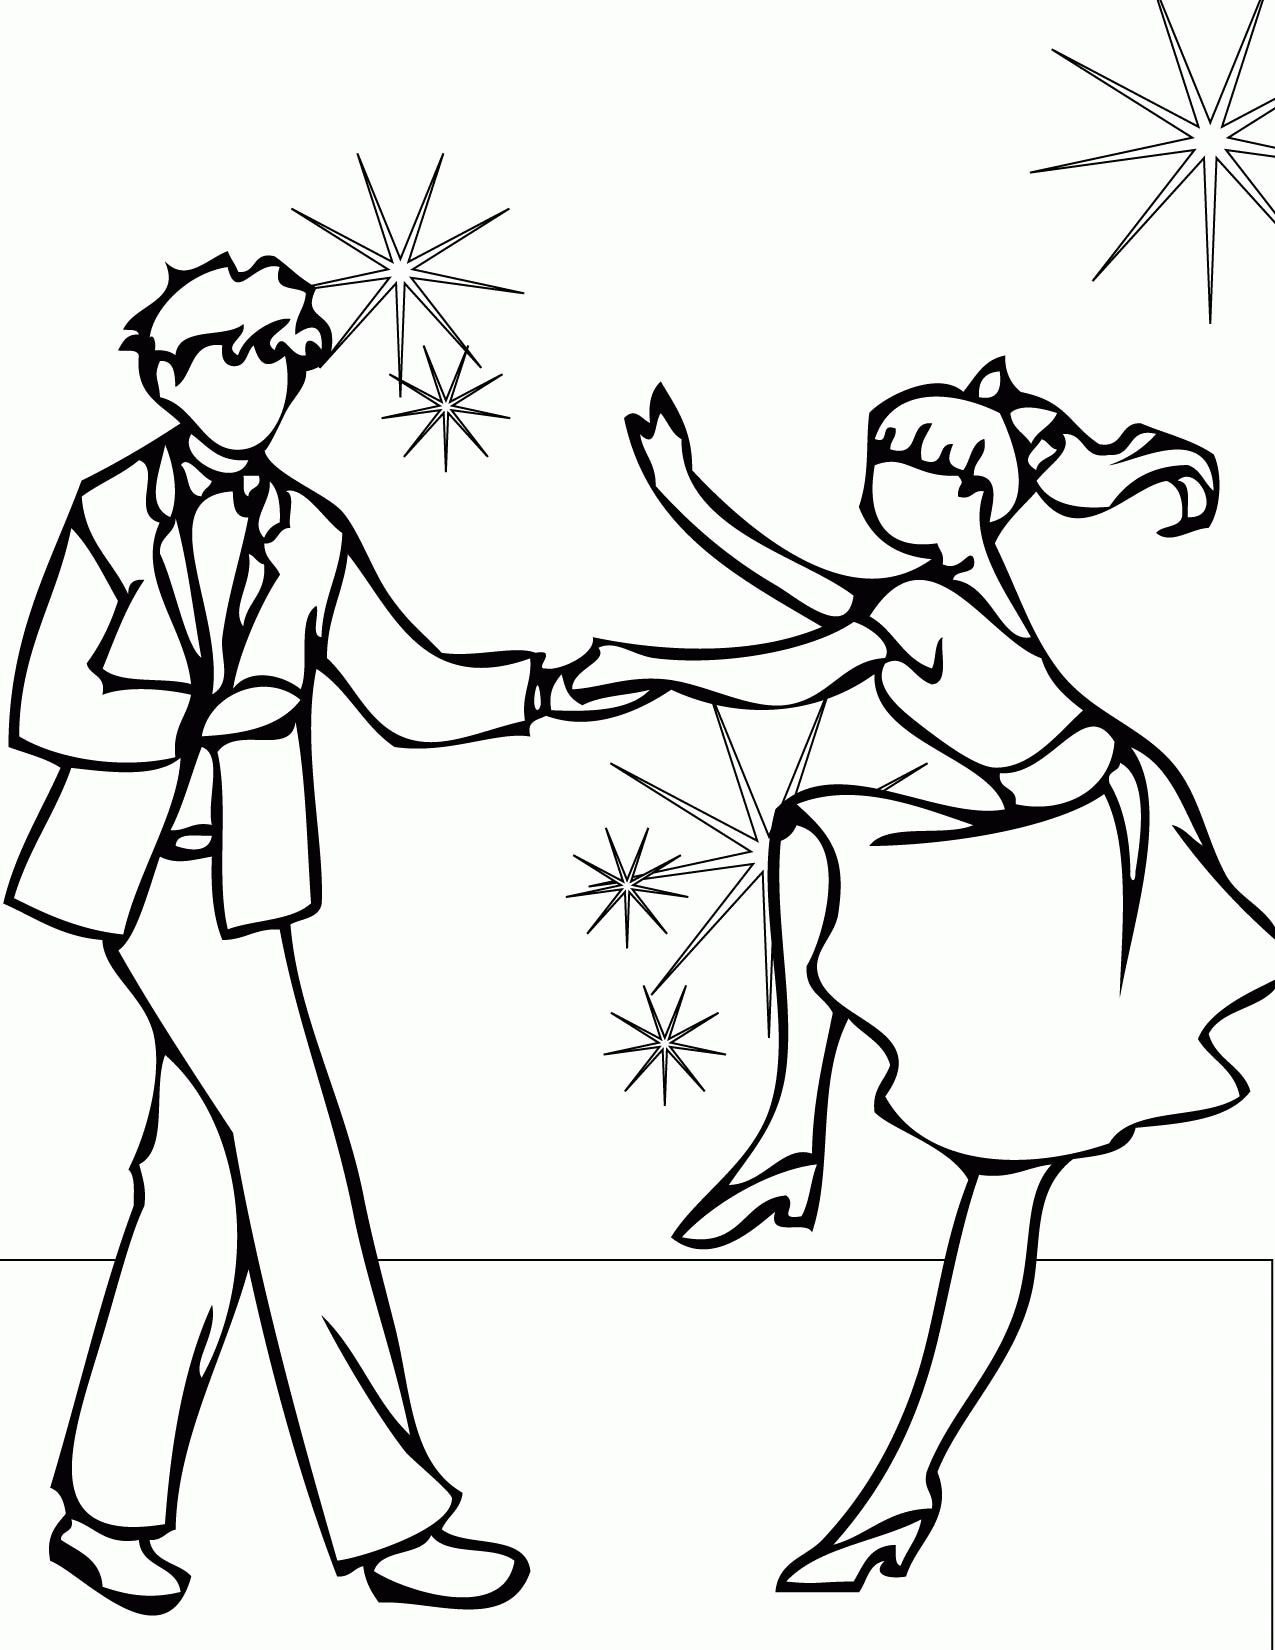 Dance For Kids - Coloring Pages for Kids and for Adults